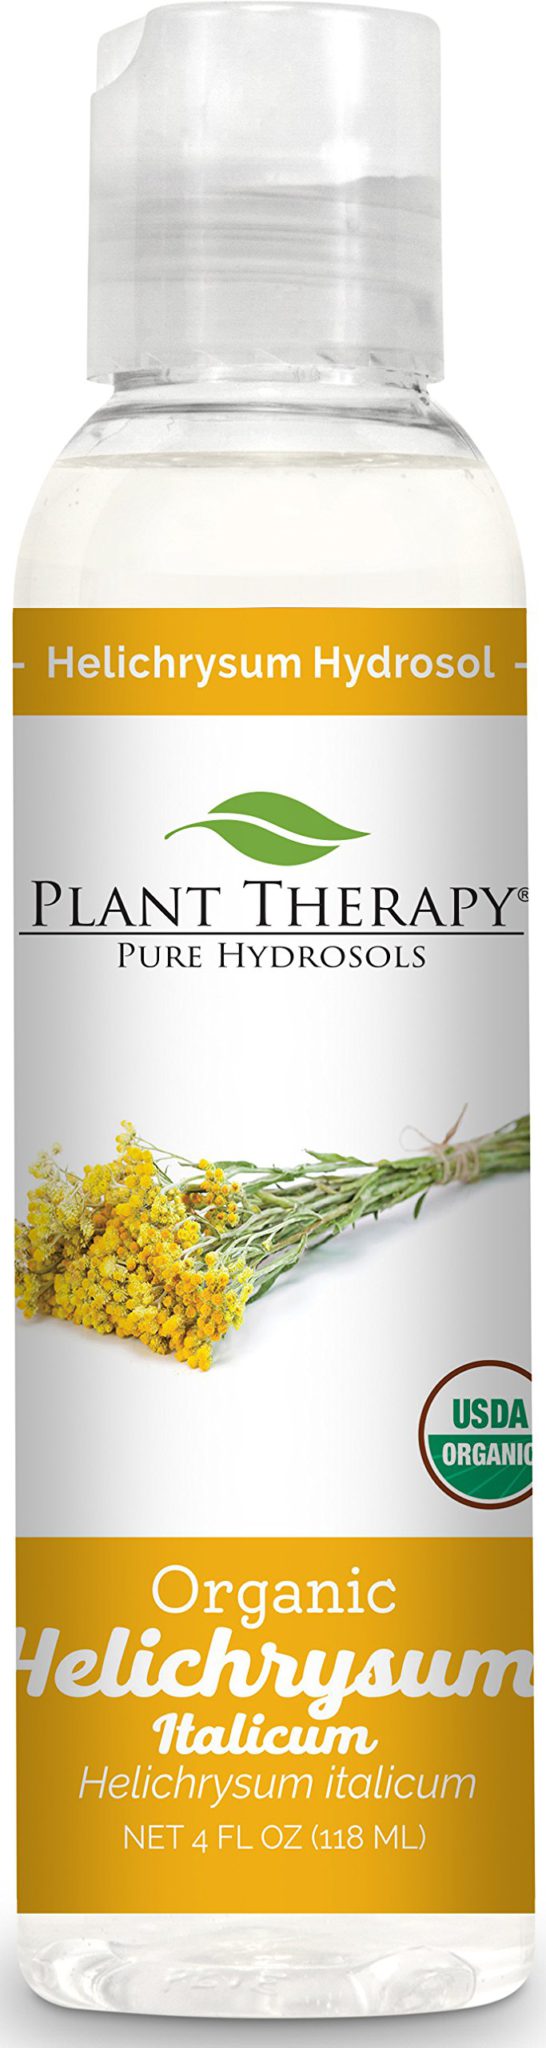 Plant Therapy Organic Helichrysum Hydrosol. (Flower Water, Floral Water, Hydrolats, Distillates) Bi-Product of Essential Oils. 4 Ounce. - $18.95